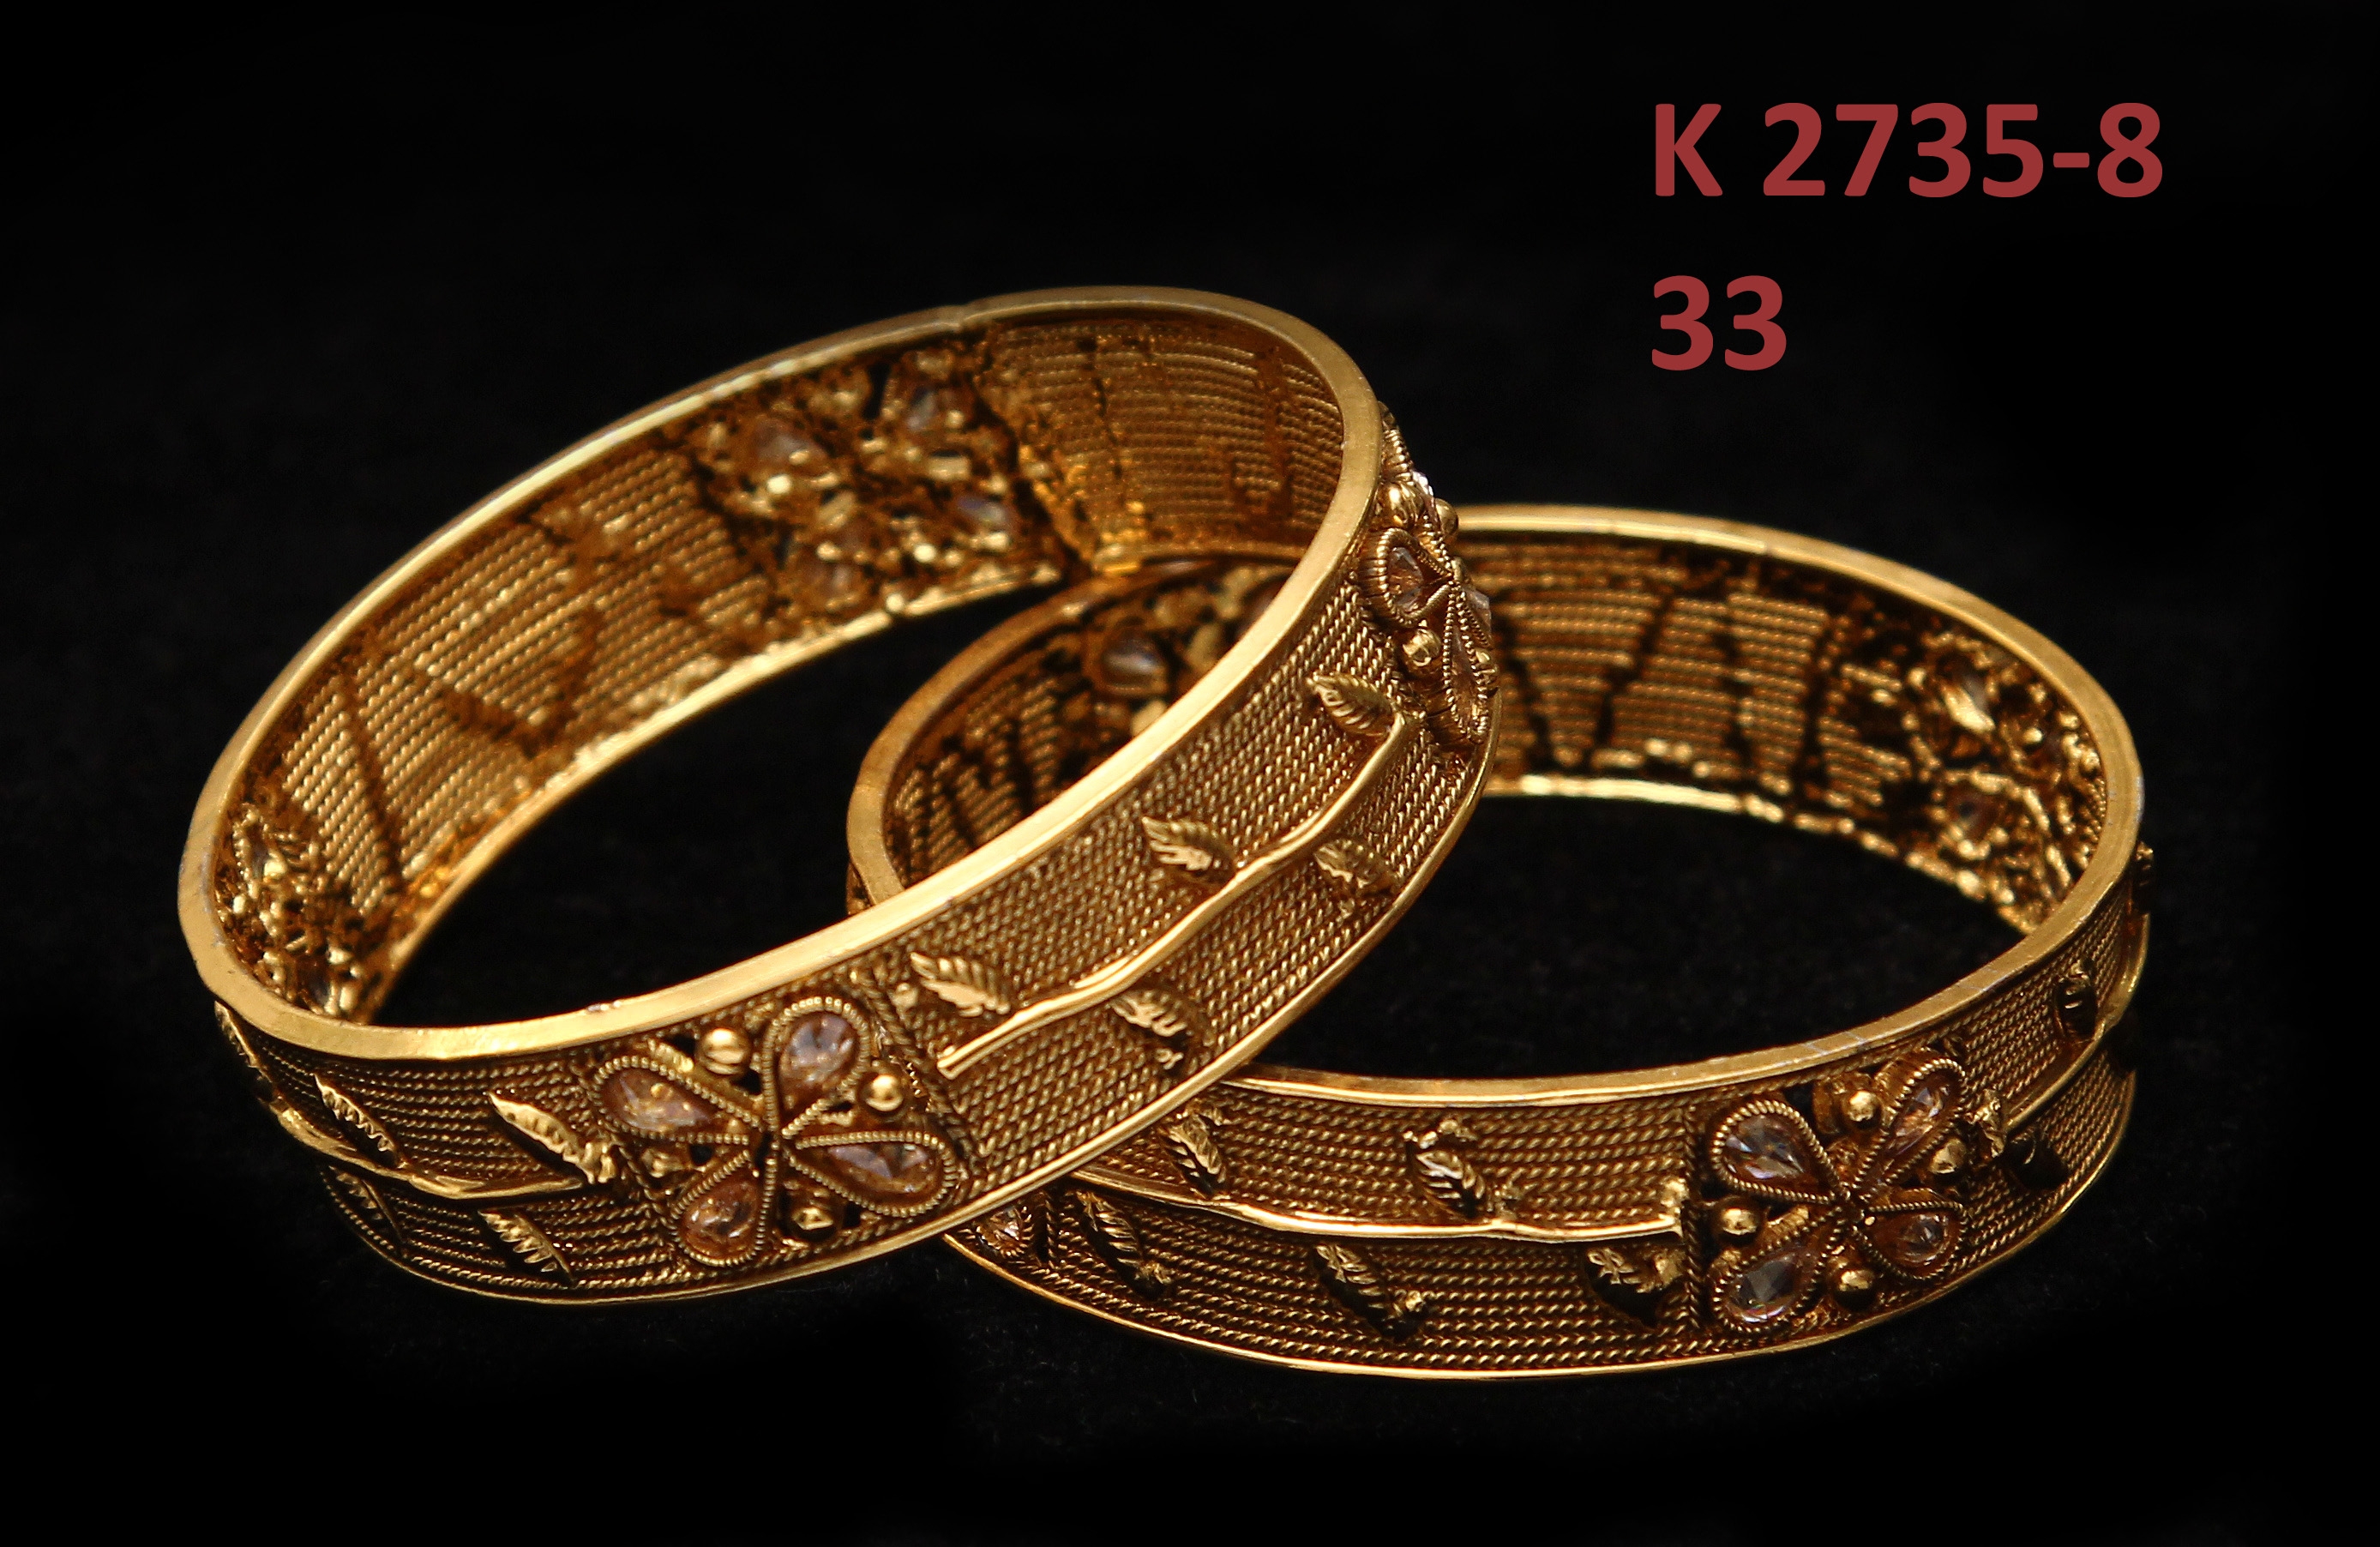 55Carat | 55Carat Stone Inticrated Exclusive Jewellery Gold-Plated Bangle Set Of 2 For Womens And Girls